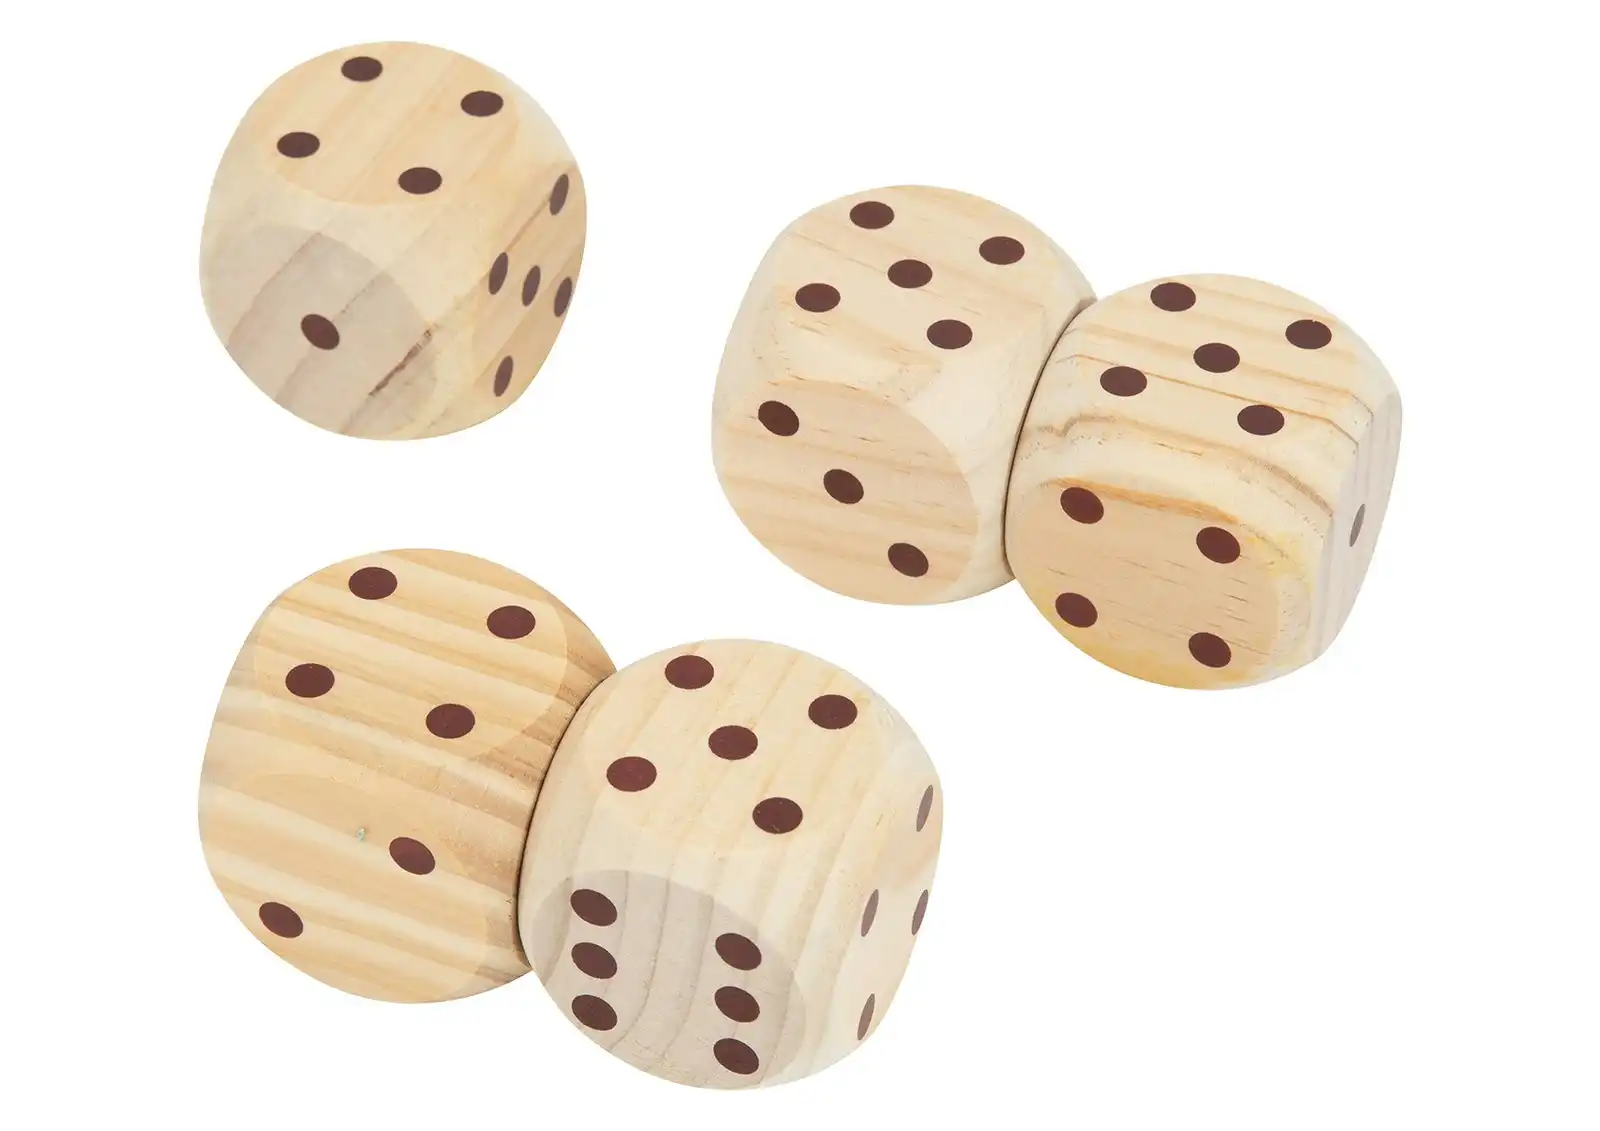 5pc Tooky Toy Toddler/Children's Outdoor Lawn Dice Game Fun Activity 3+